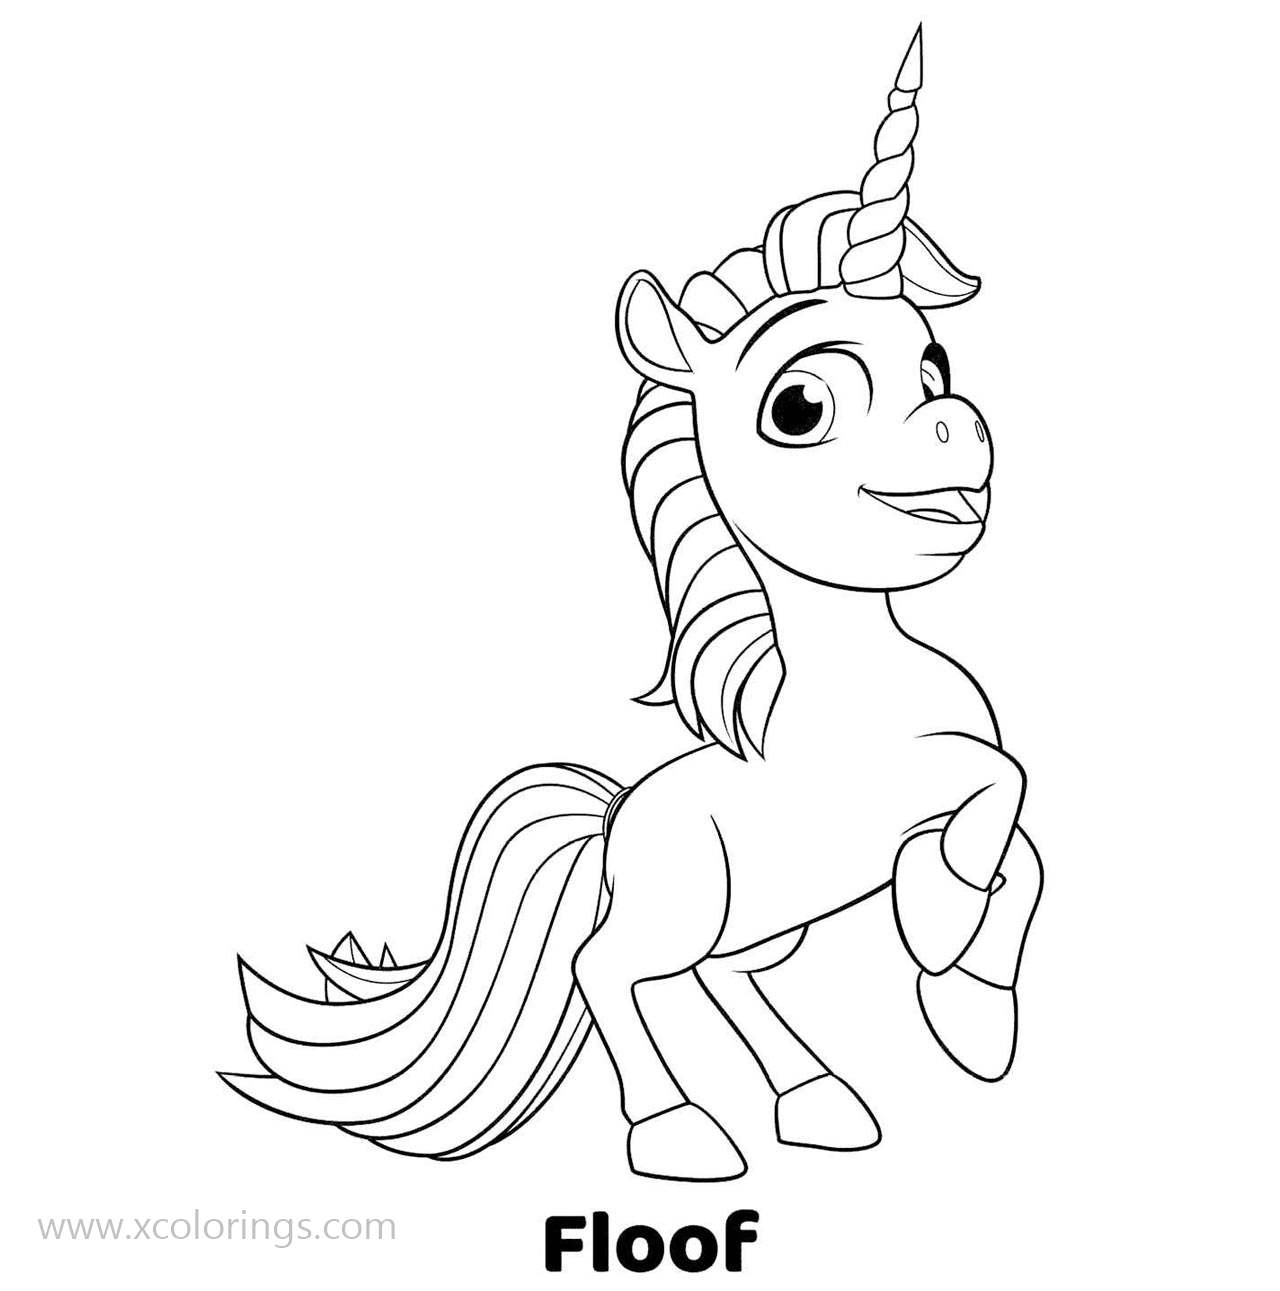 Free Rainbow Rangers Unicorn Floof Coloring Pages printable